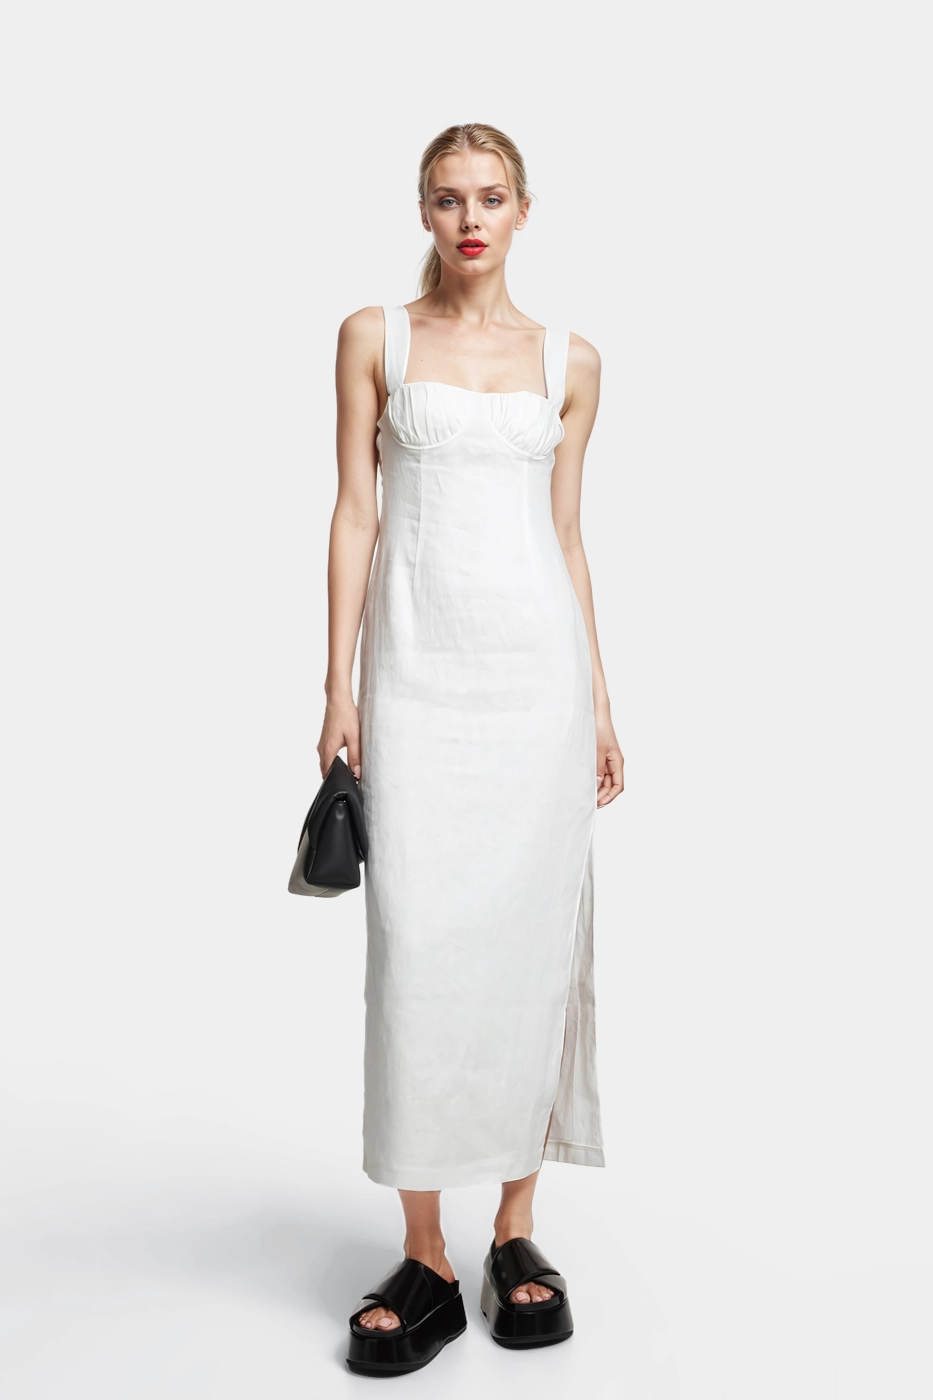 The Lucy midi dress is made of linen in off-white color. The dress has a flared line with a draped bustier